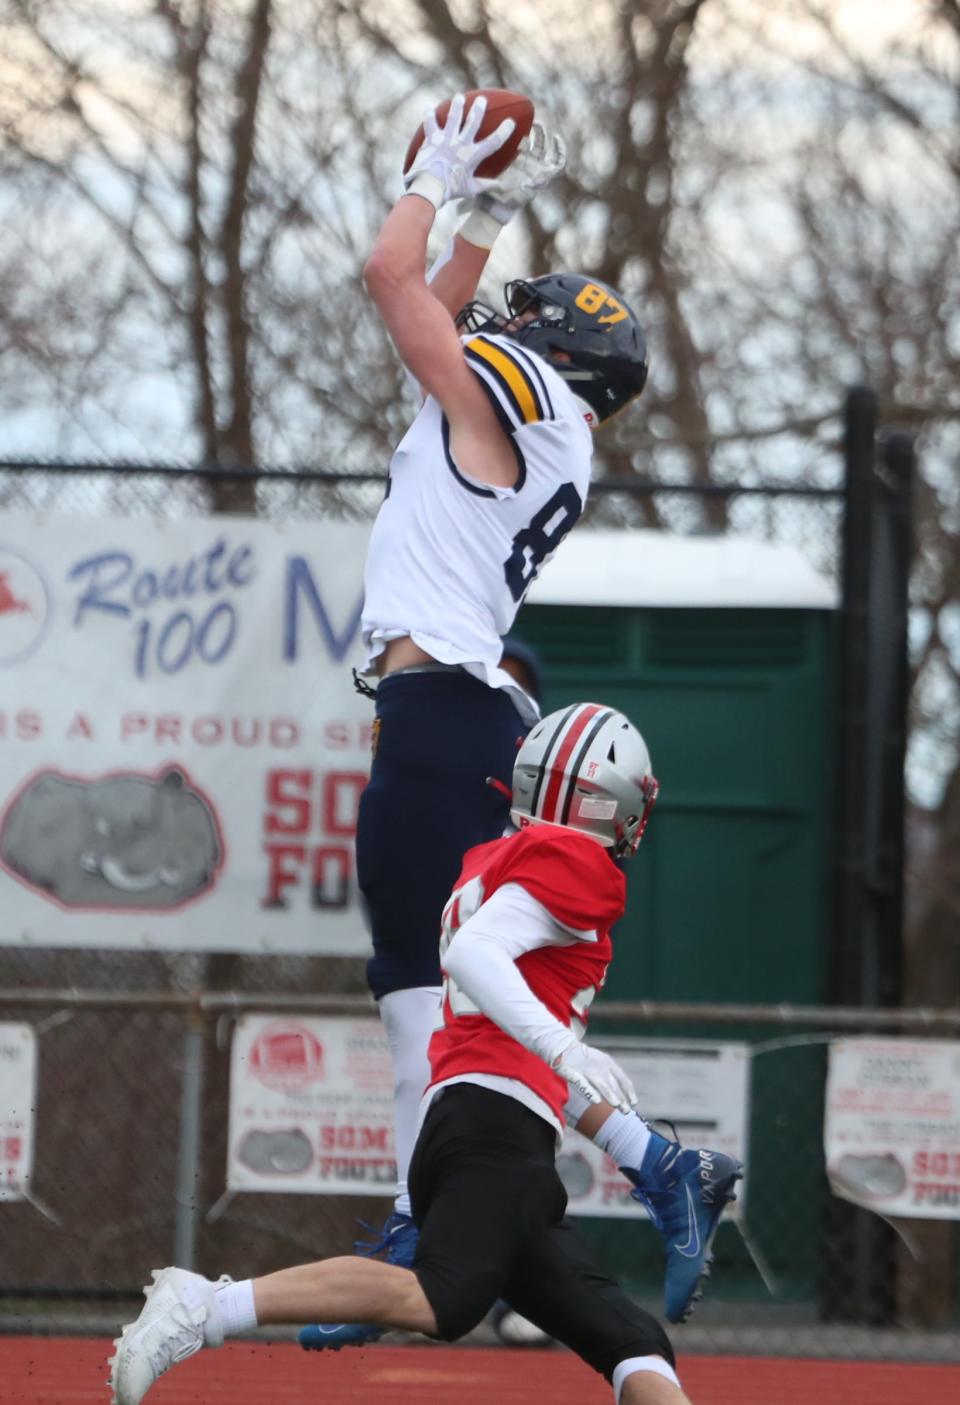 Lourdes' Andrew Rappleyea makes a leaping catch downfield during an April 1, 2021 football game against Somers.